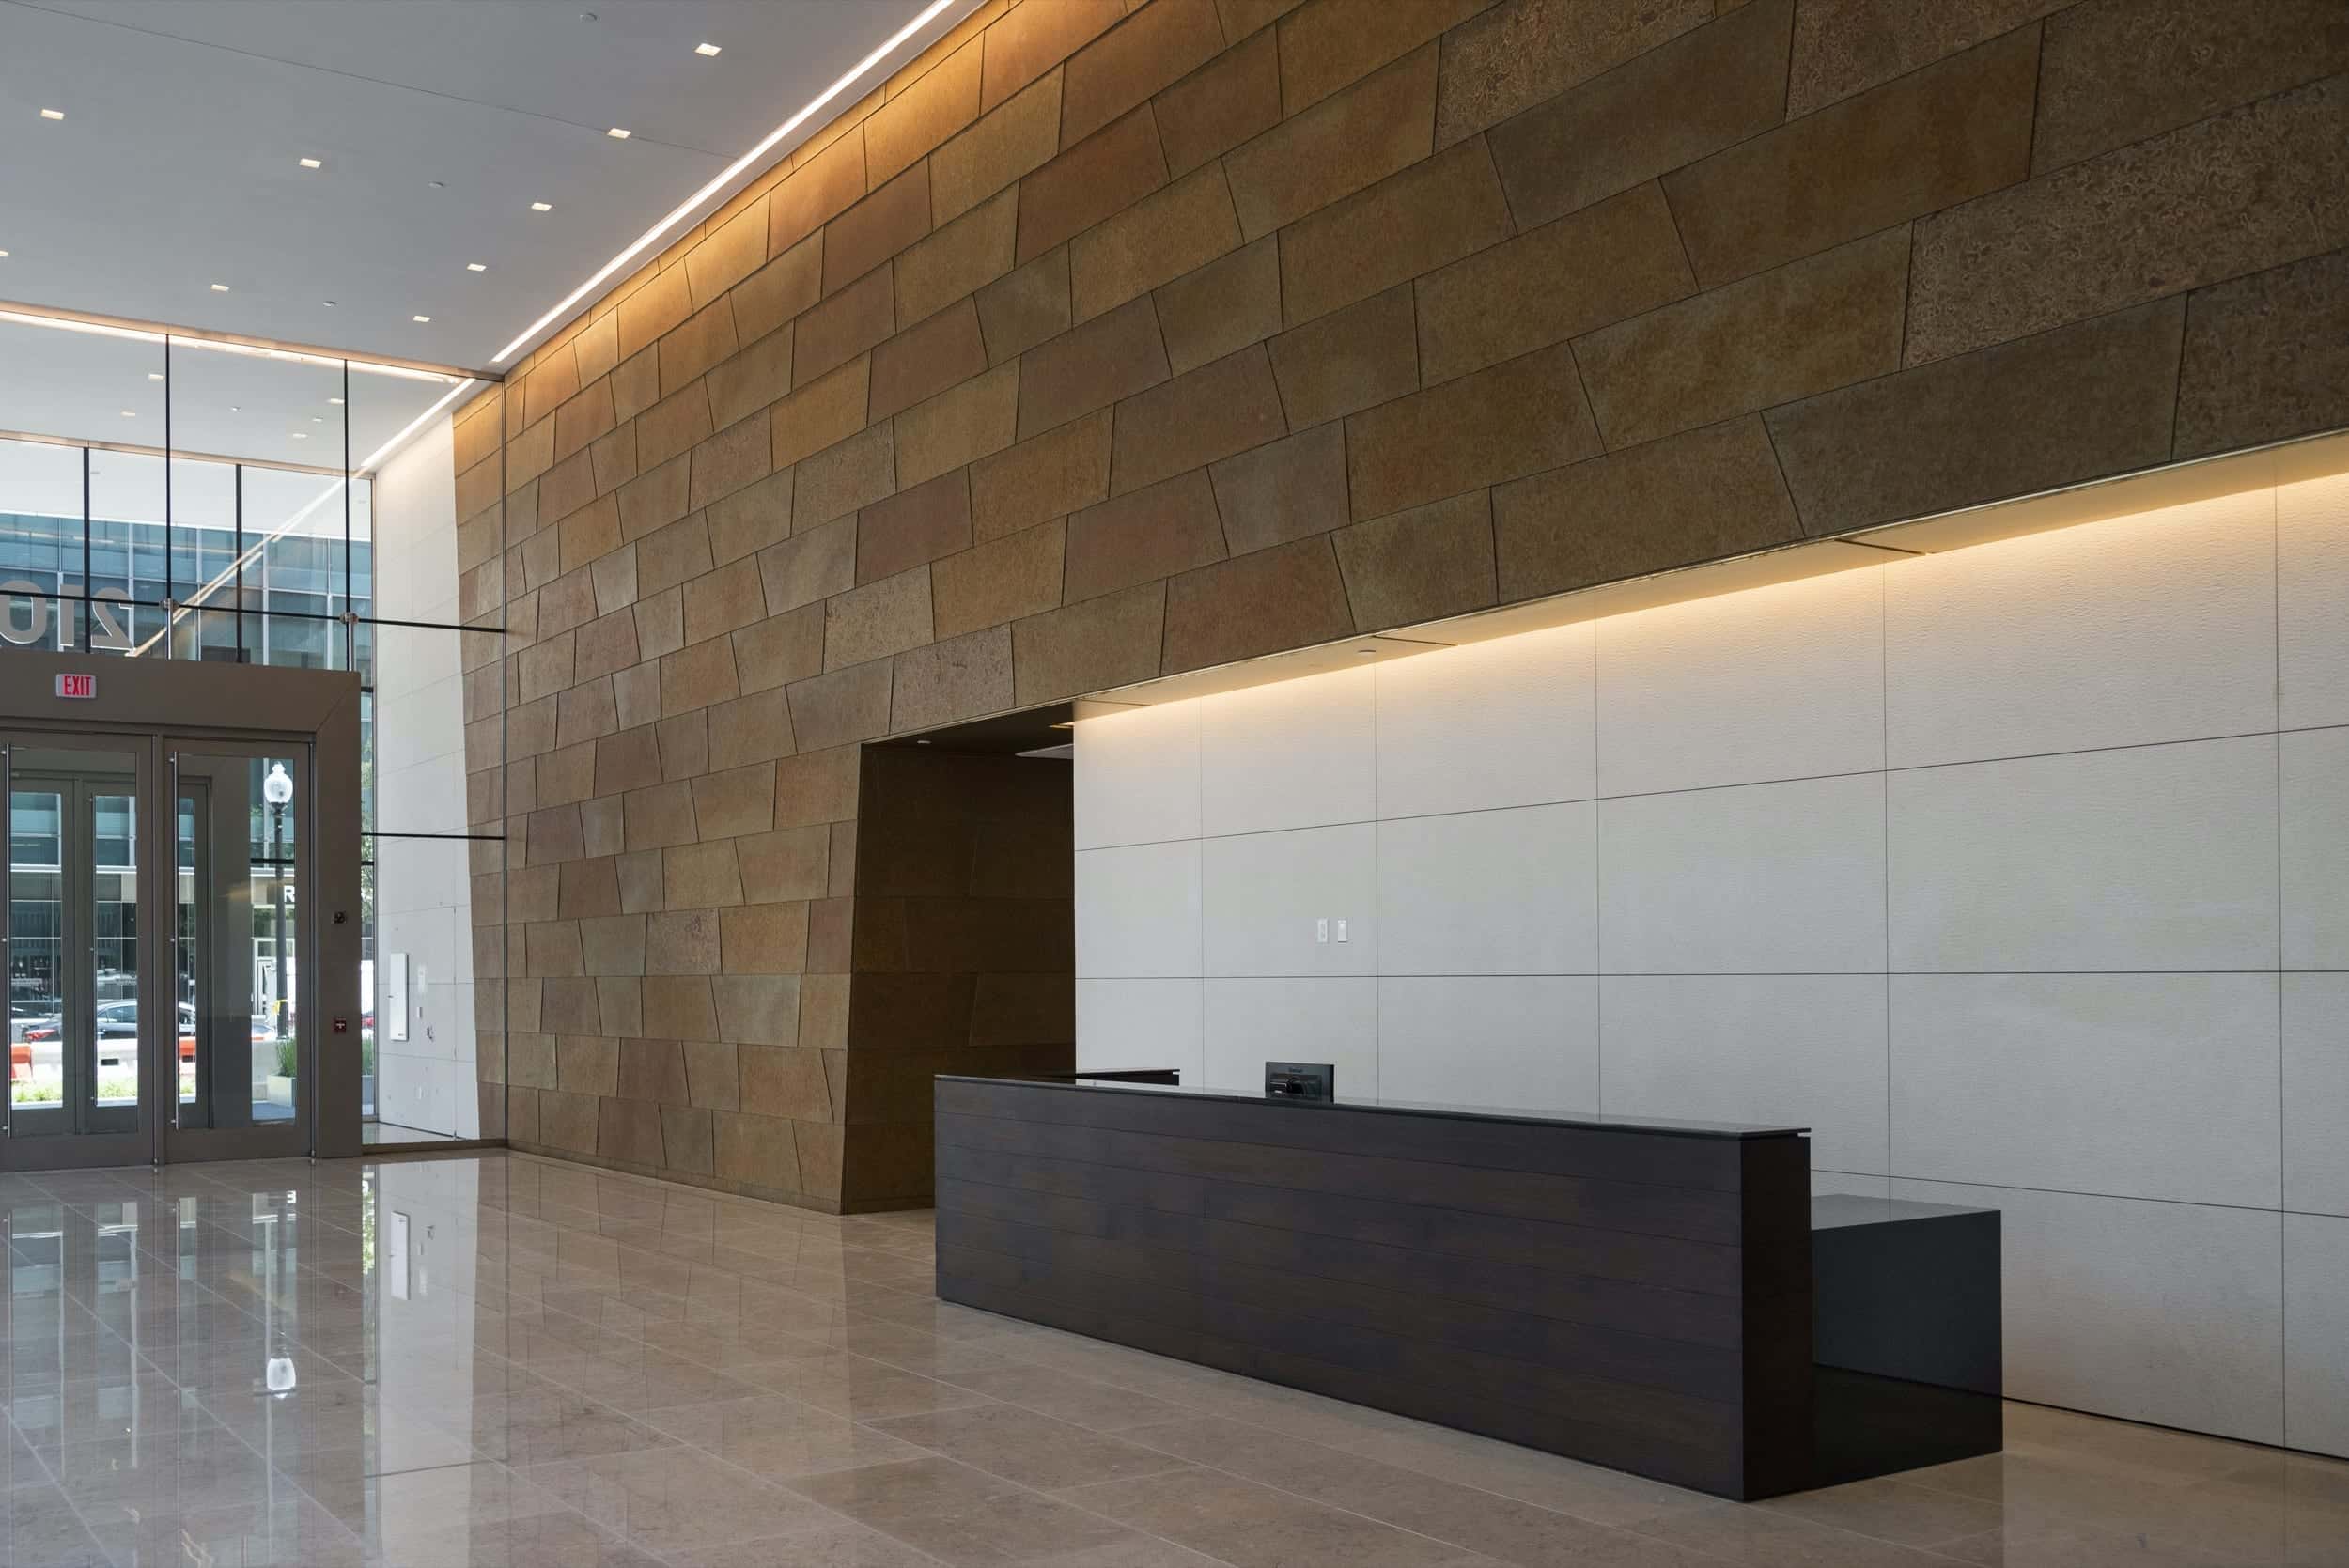 Interior lobby cladded with Roano zinc panels.